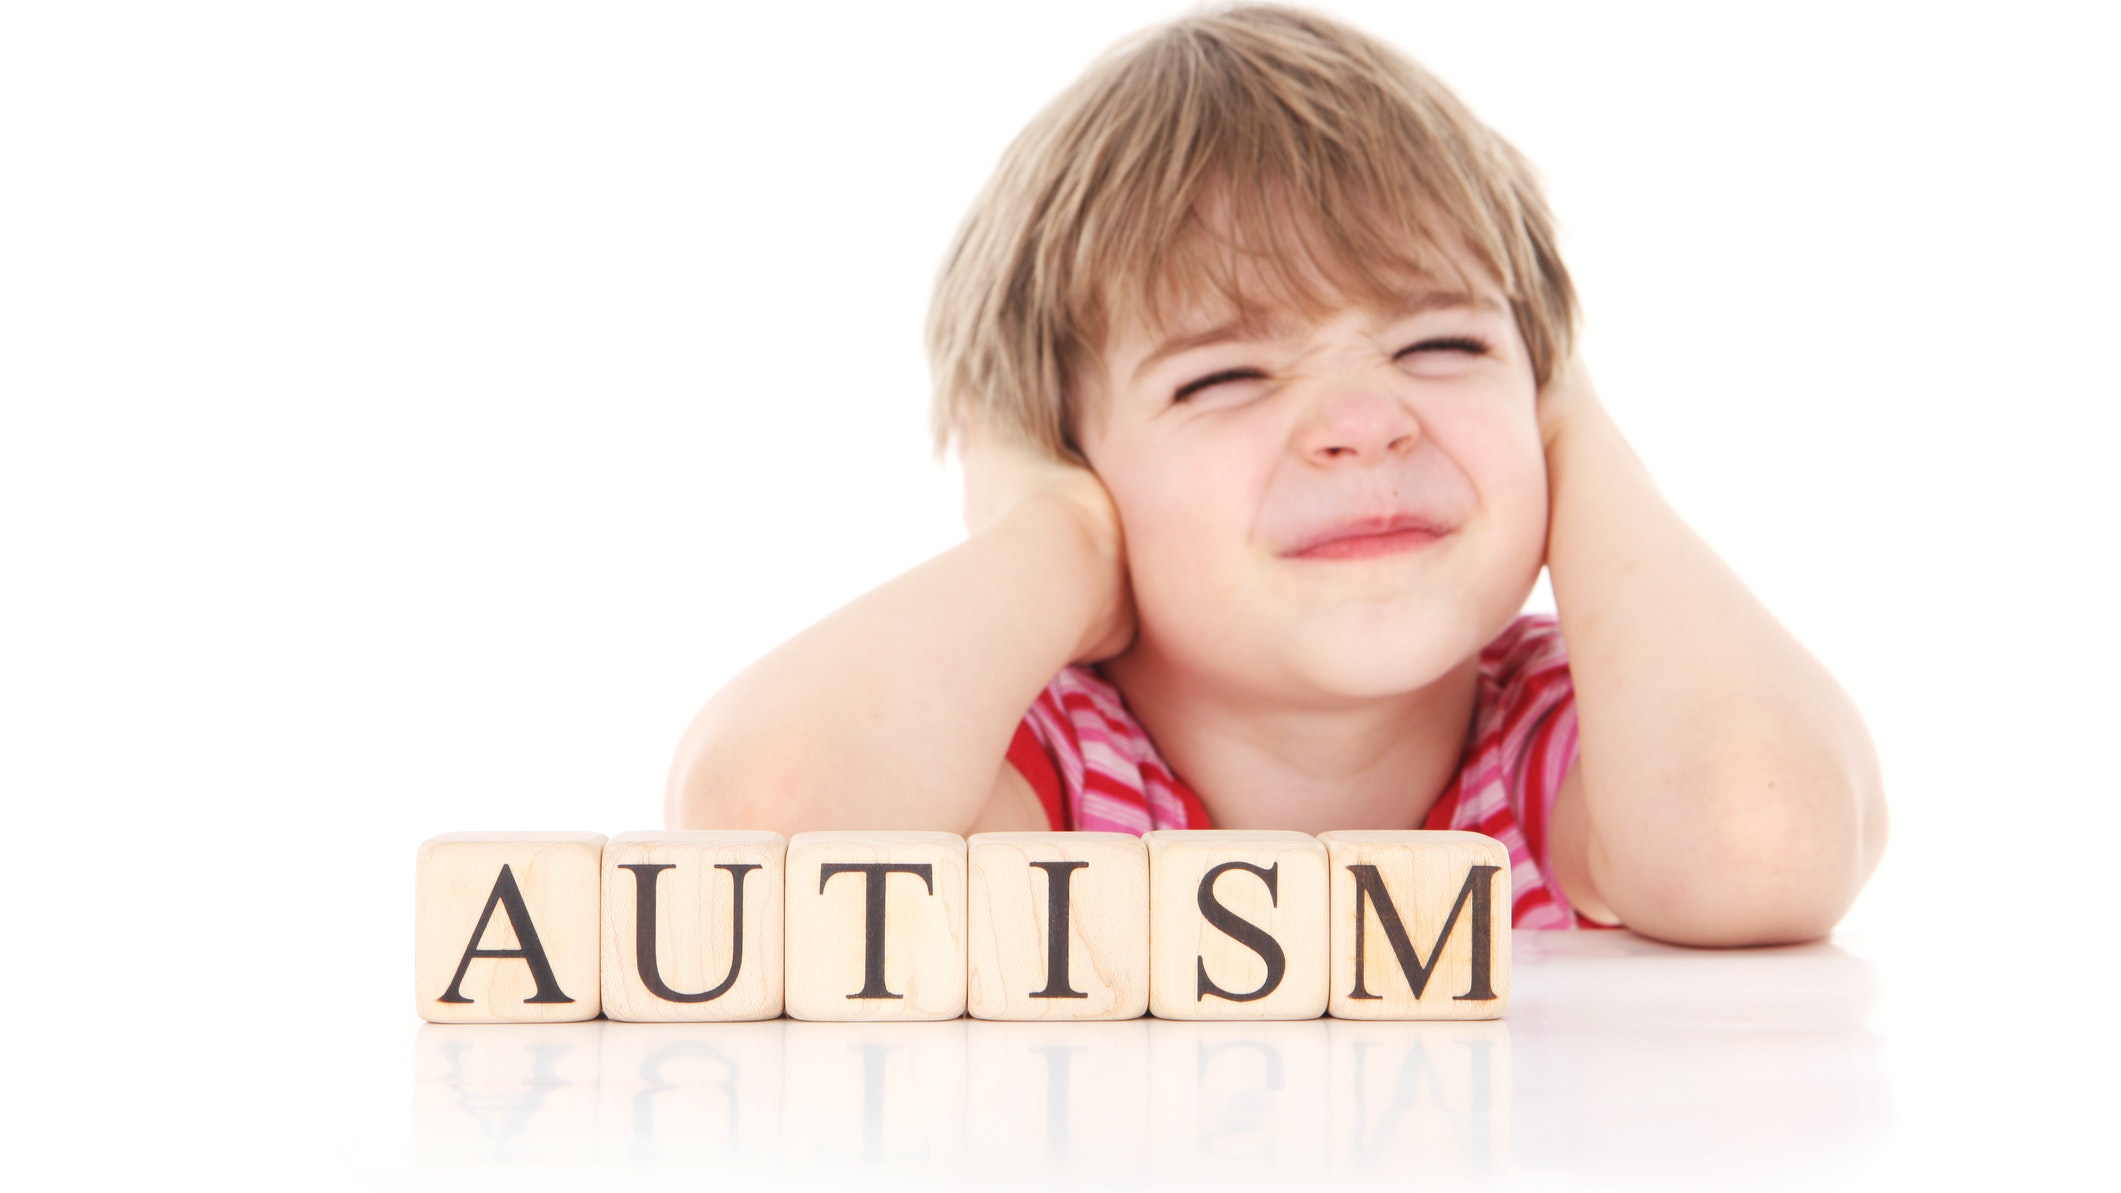 It’s World Autism Awareness Week: Here are 6 ways to make life easier